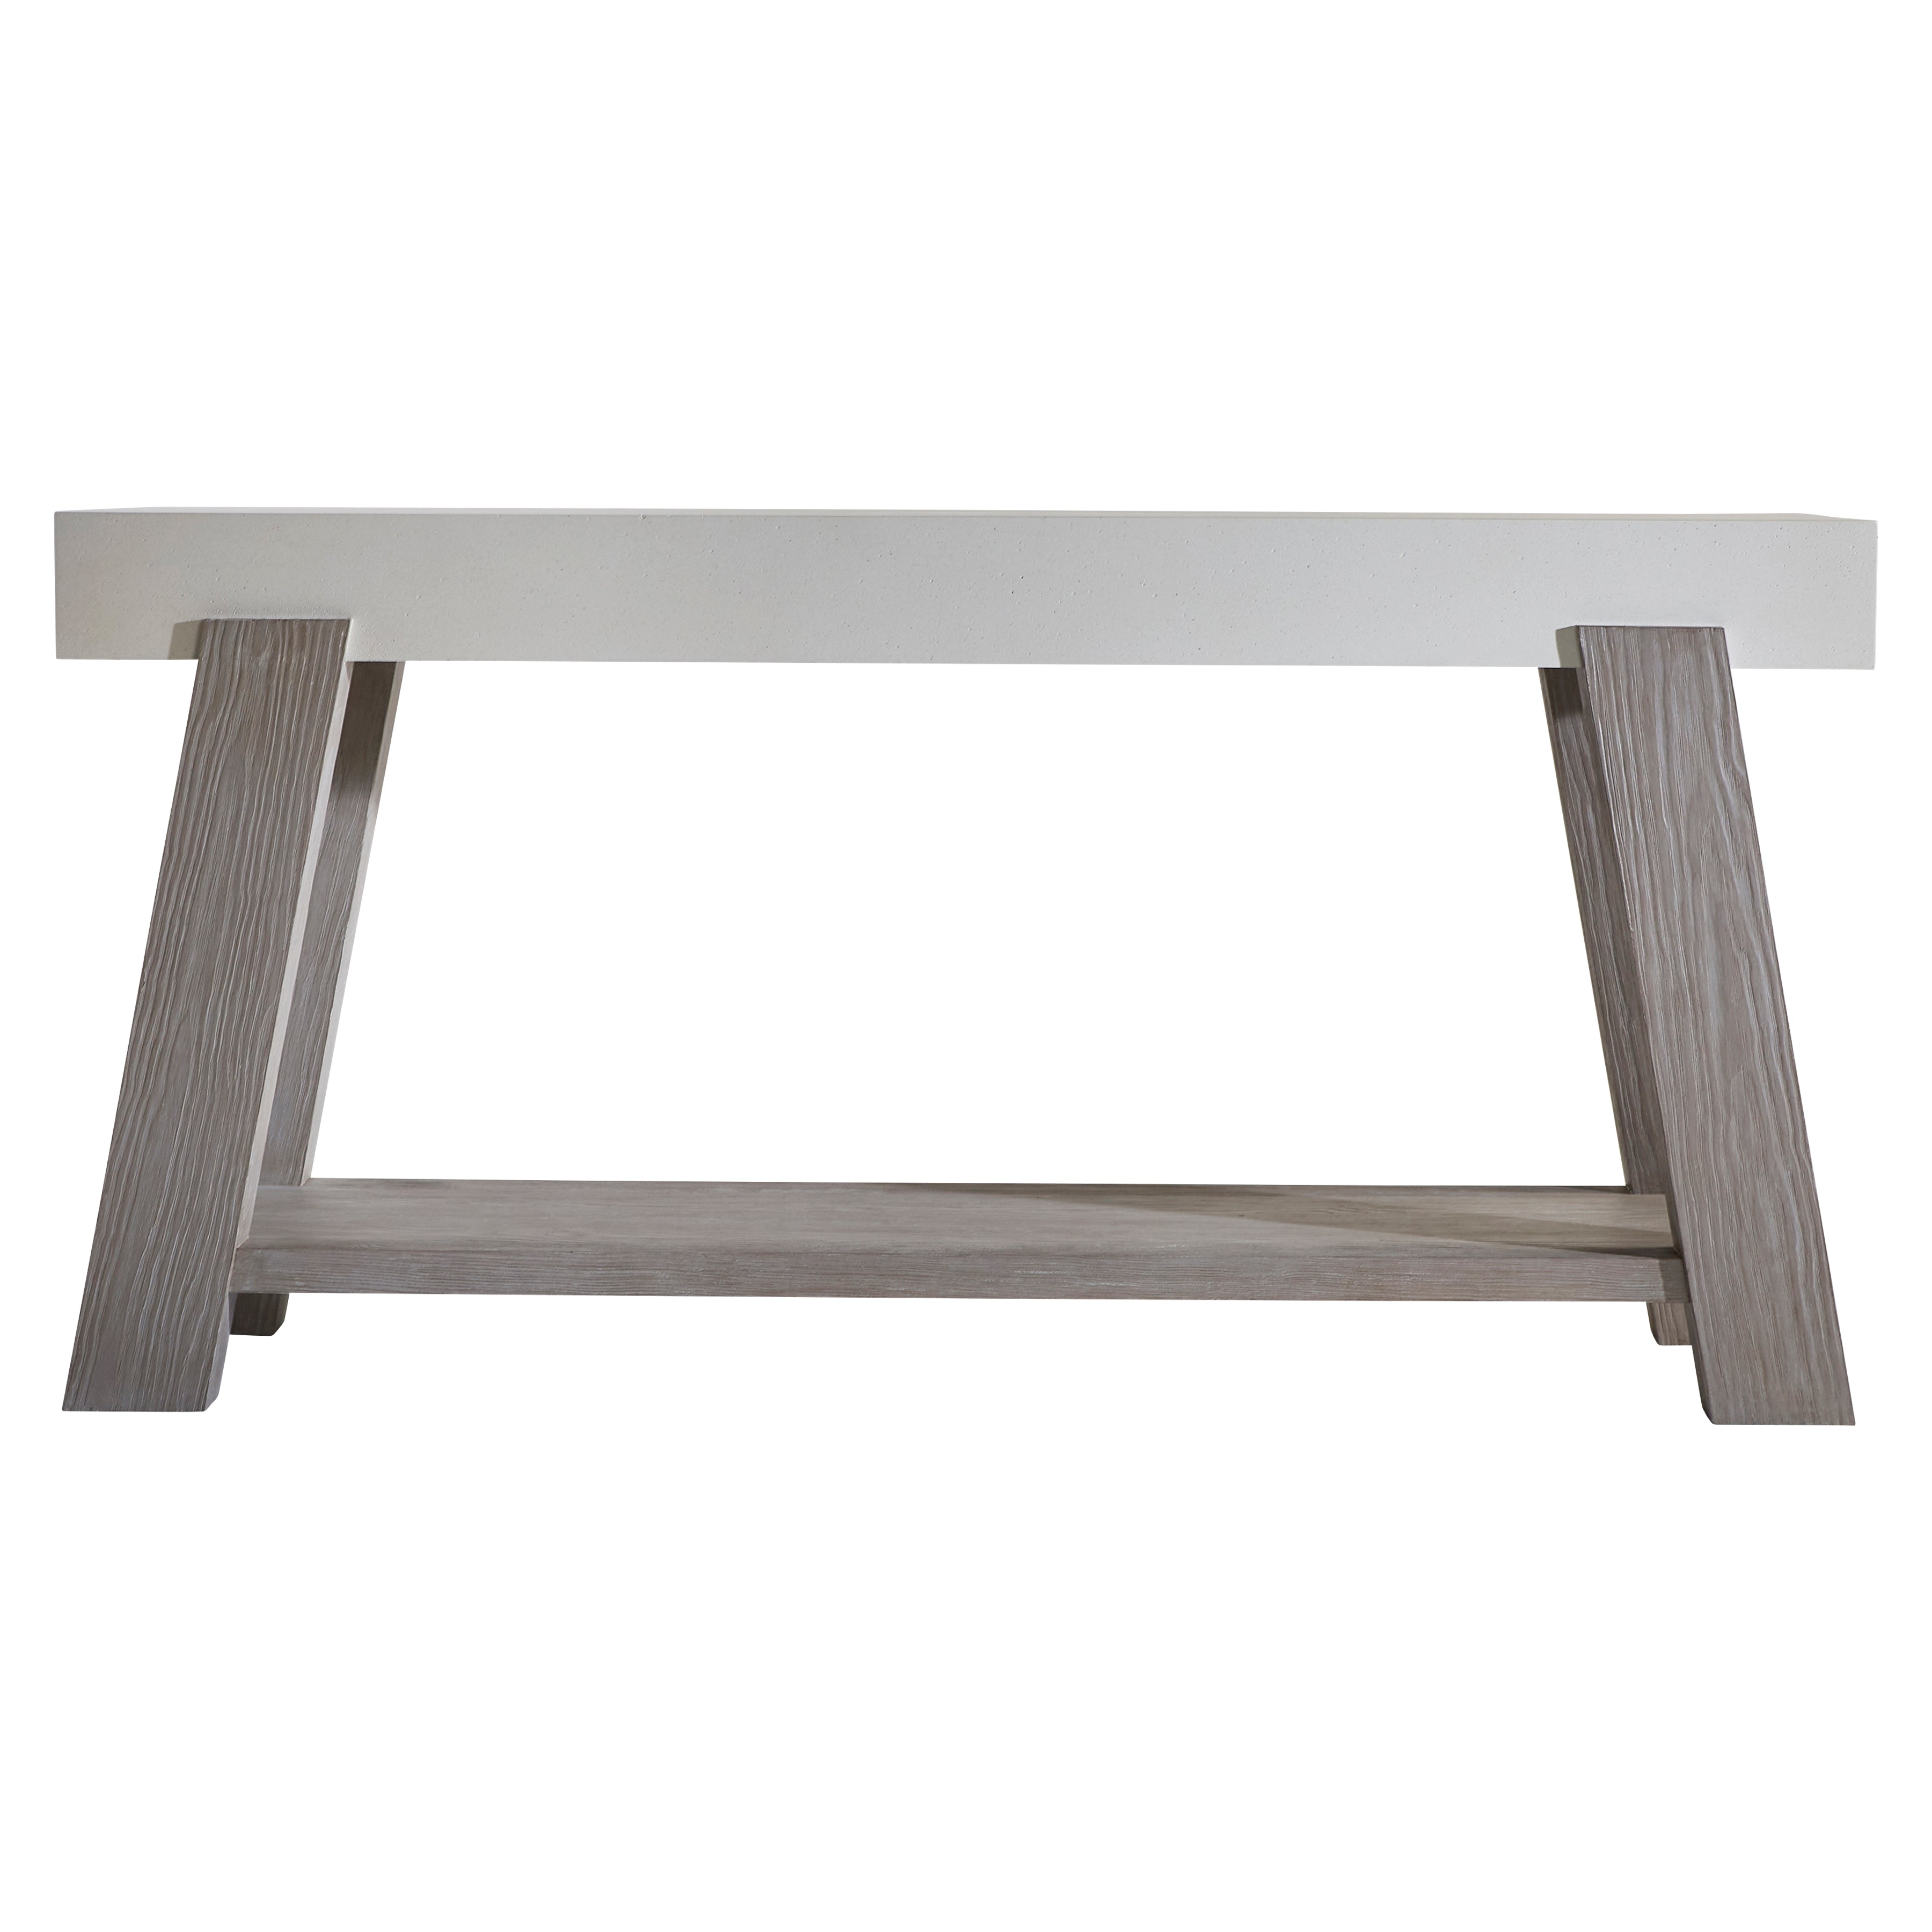 Trianon Console Table with Four Splayed Legs